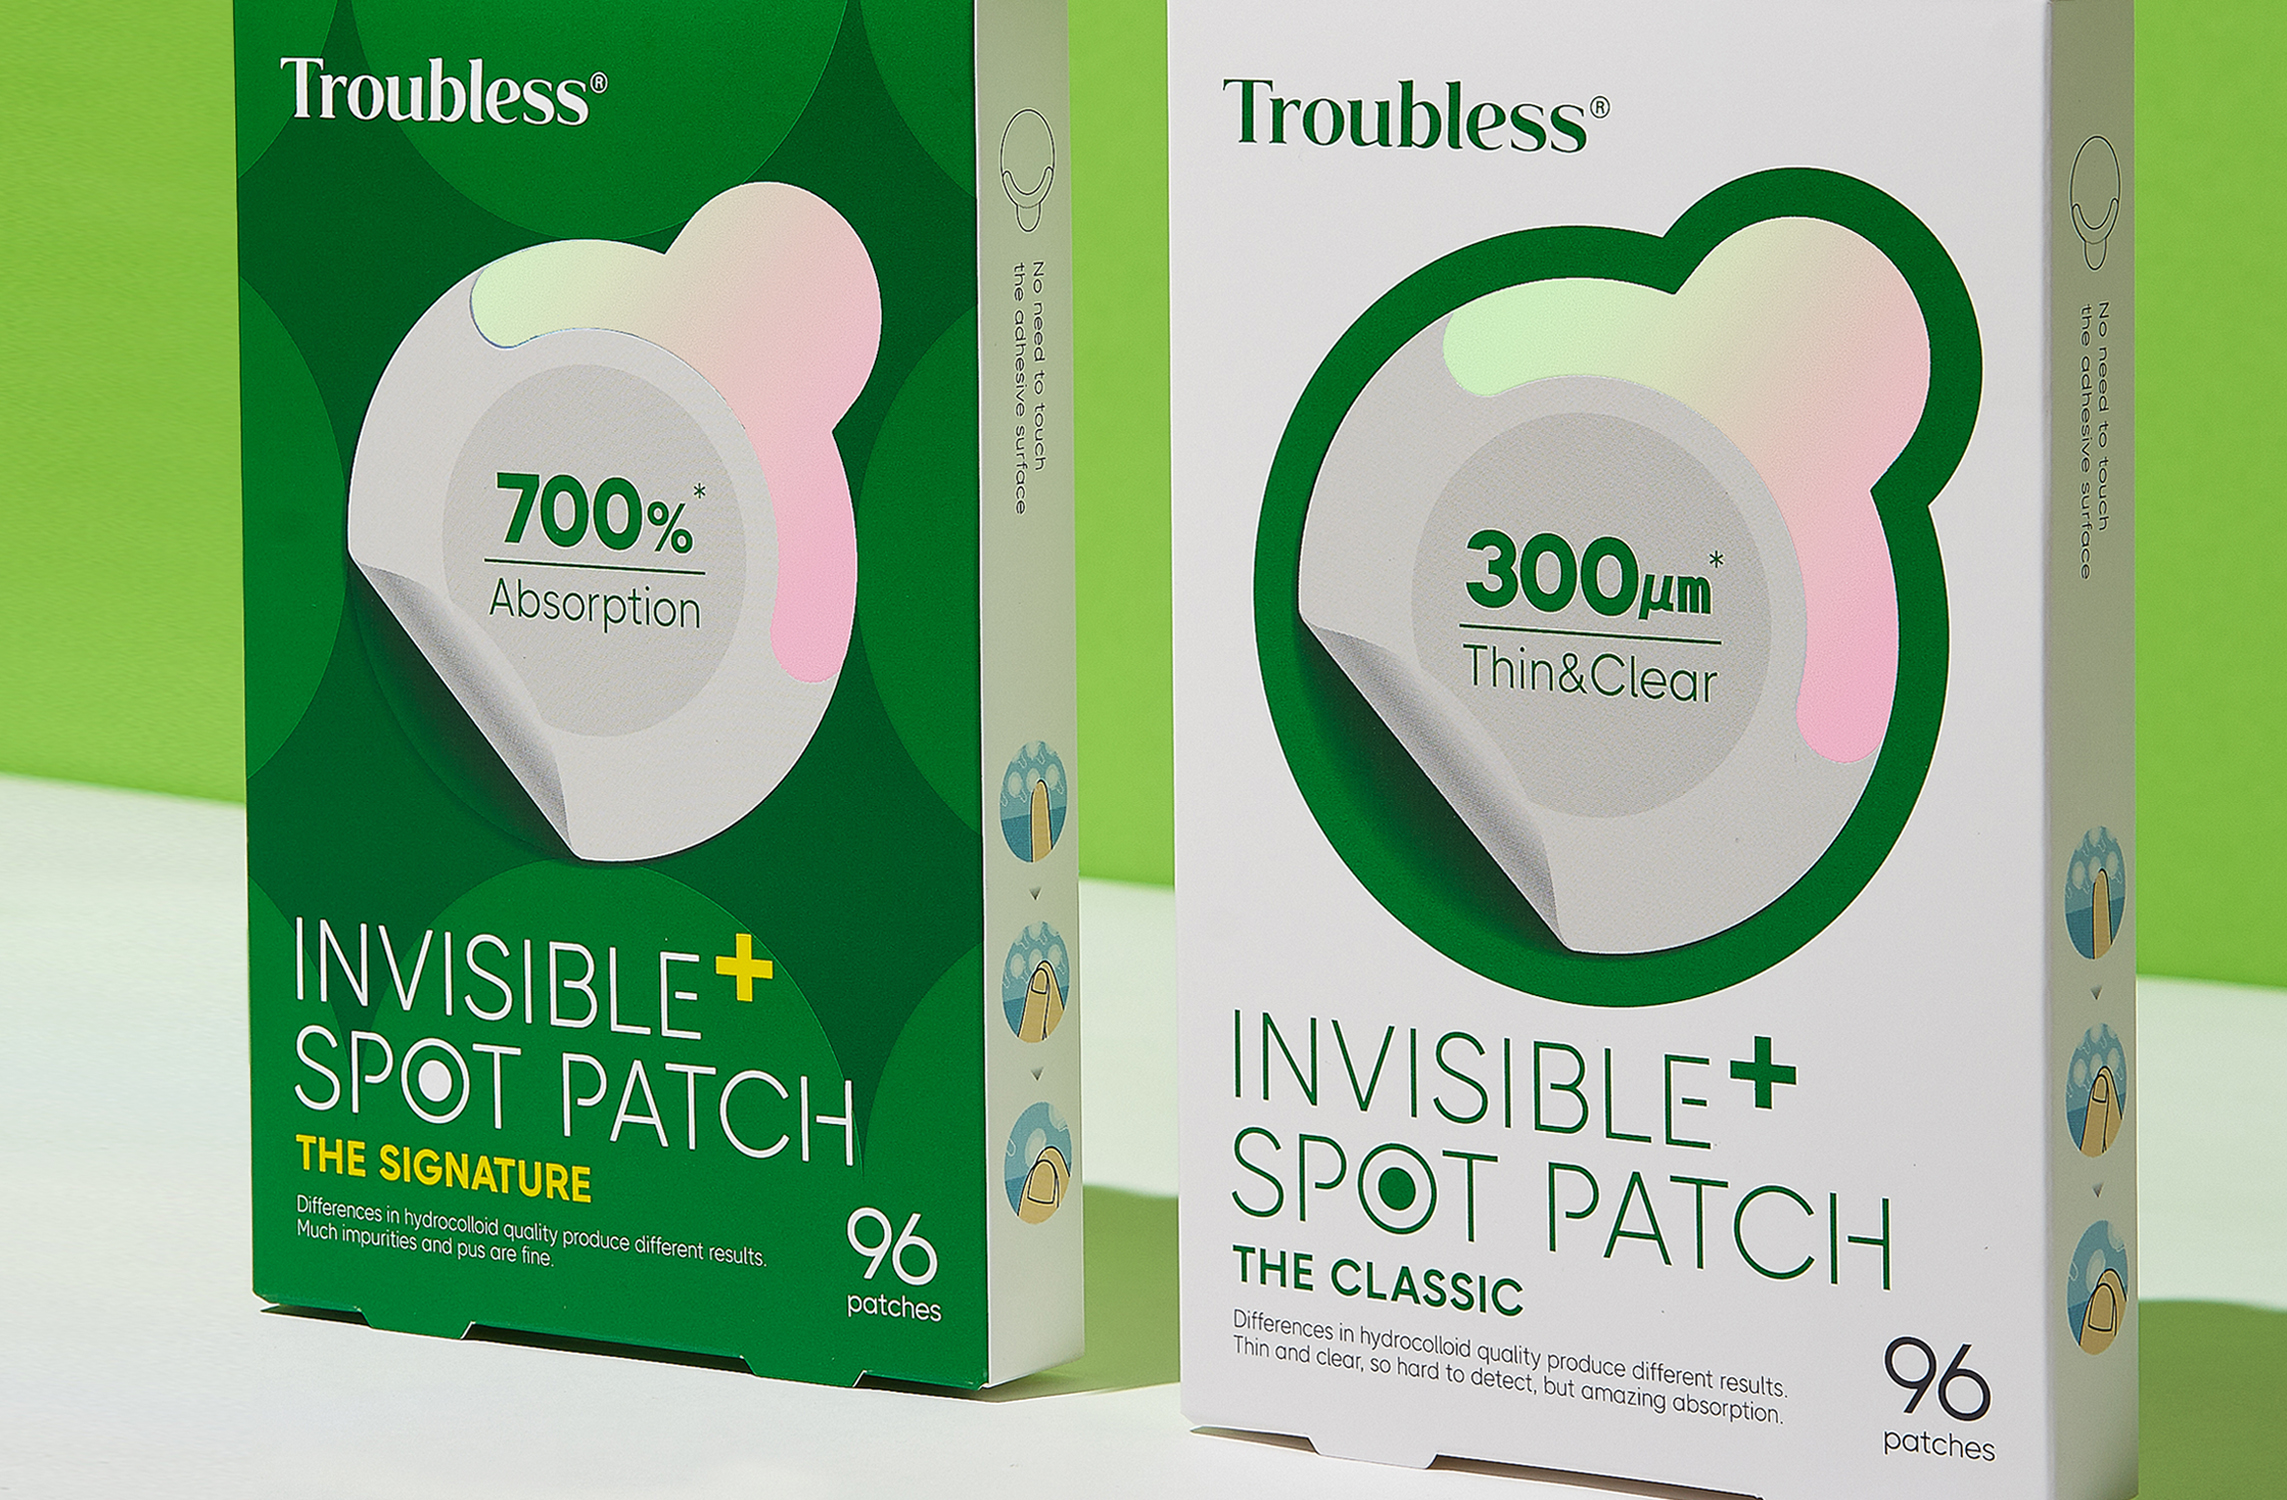 Troubless Invisible Spot Patch